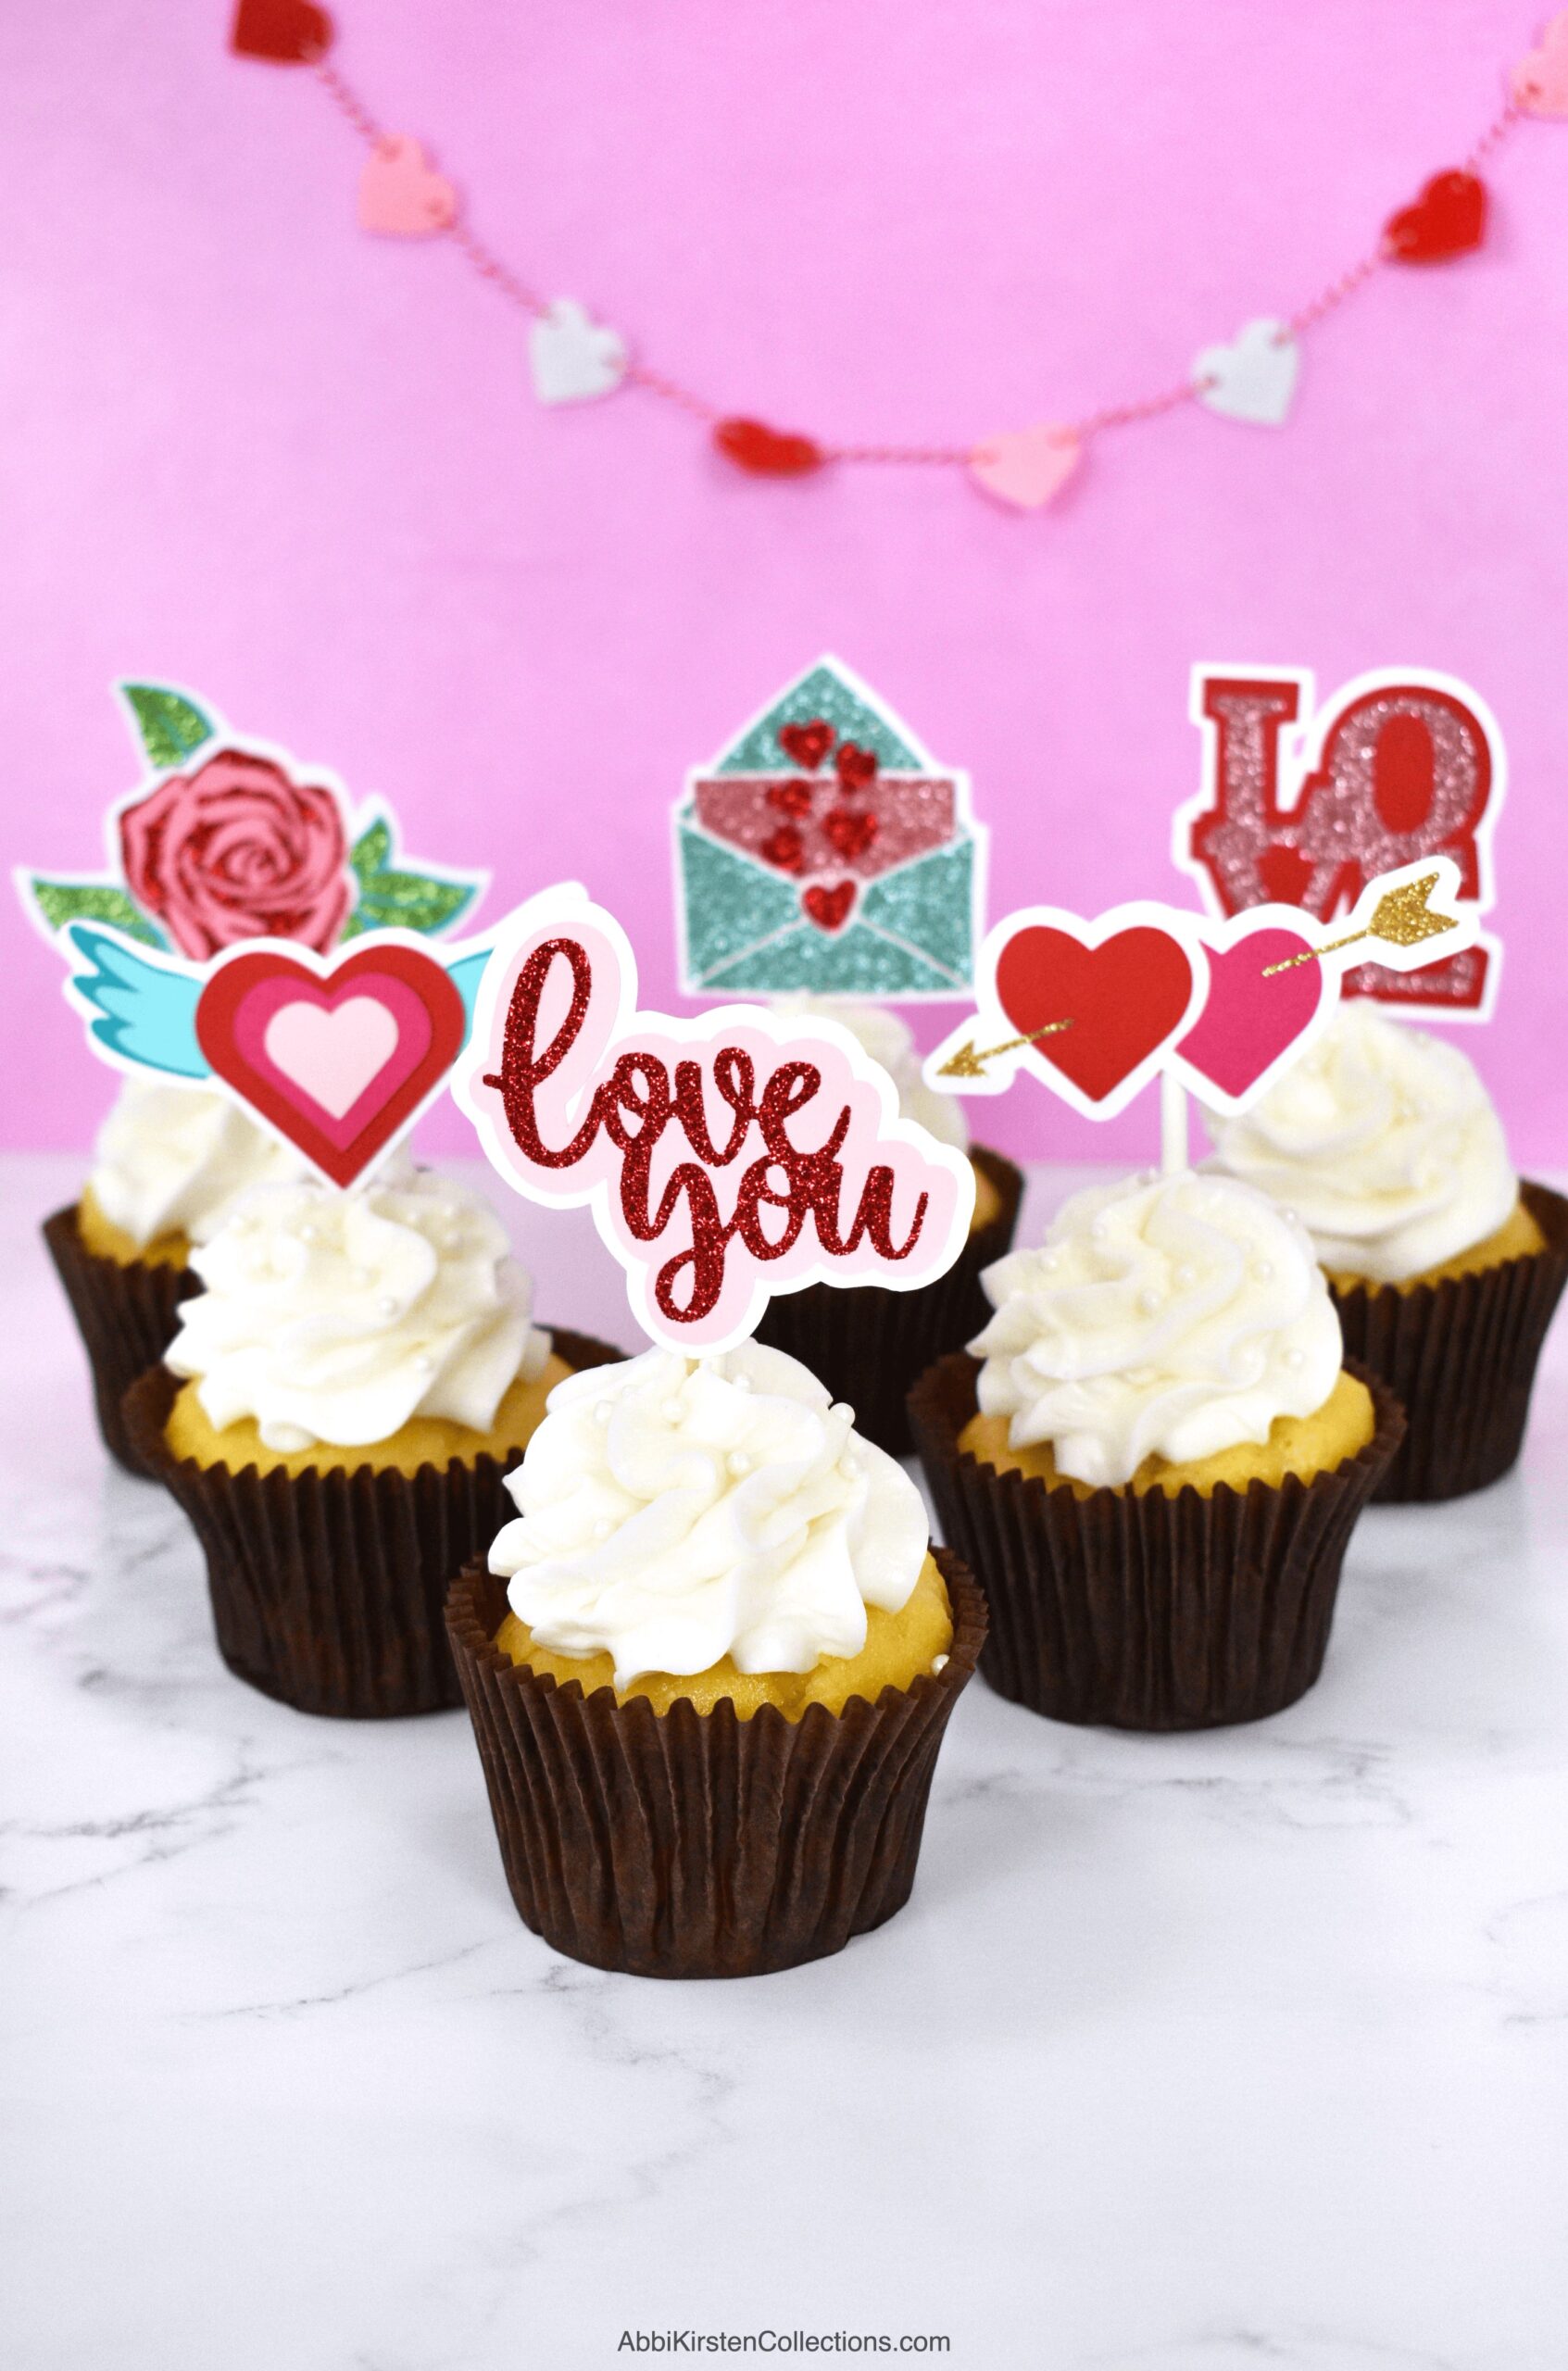 DIY Cupcake Toppers With Cricut: Valentine’s Day Cake Toppers